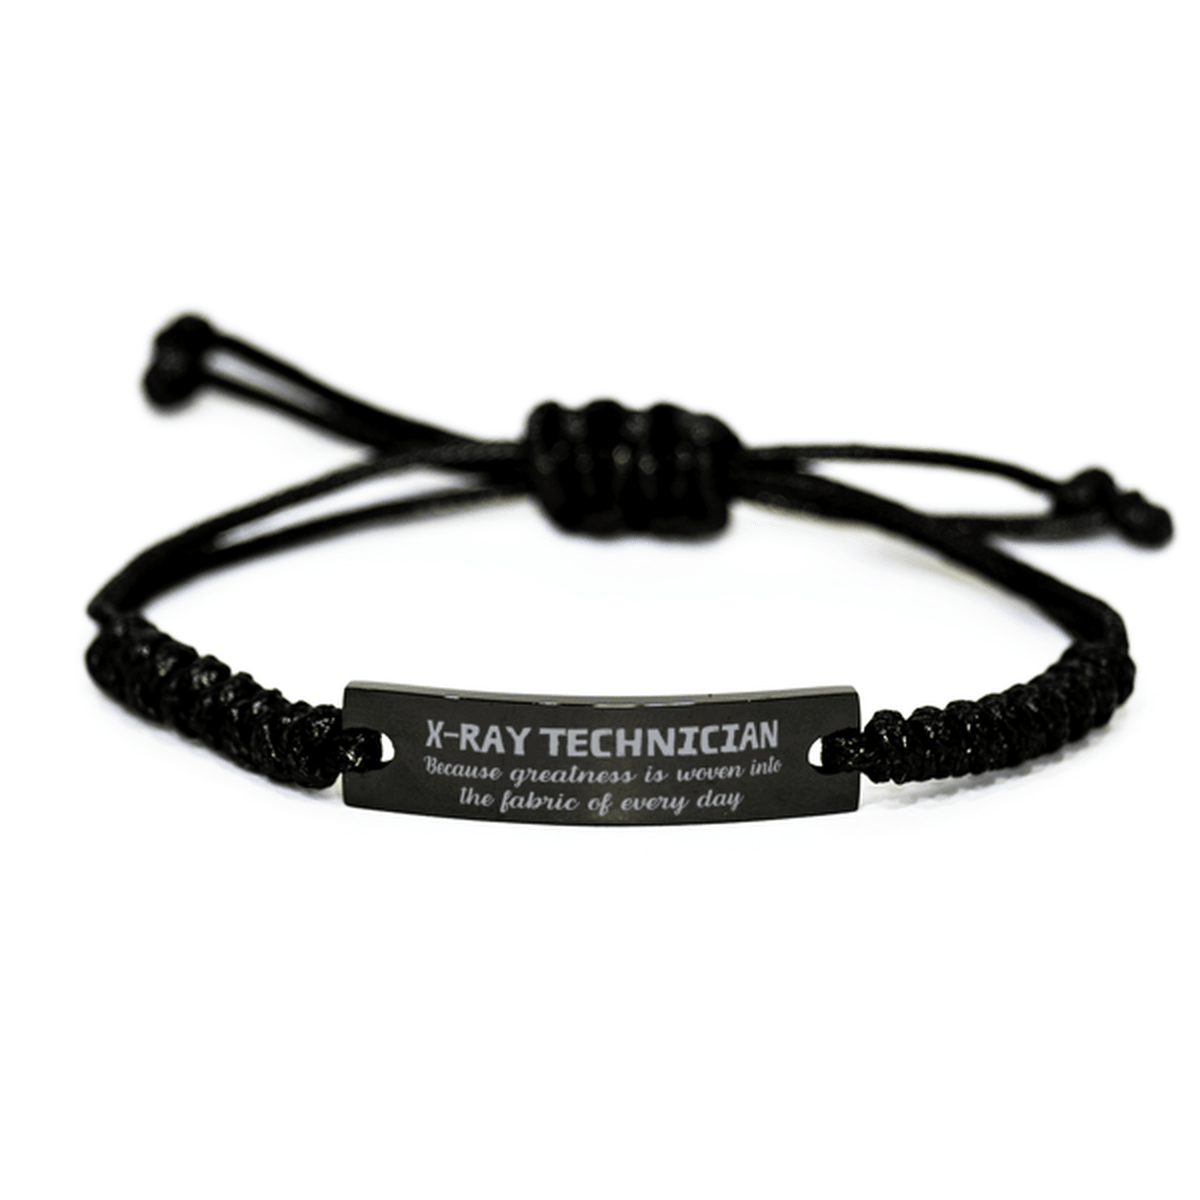 Sarcastic X-Ray Technician Black Rope Bracelet Gifts, Christmas Holiday Gifts for X-Ray Technician Birthday, X-Ray Technician: Because greatness is woven into the fabric of every day, Coworkers, Friends - Mallard Moon Gift Shop